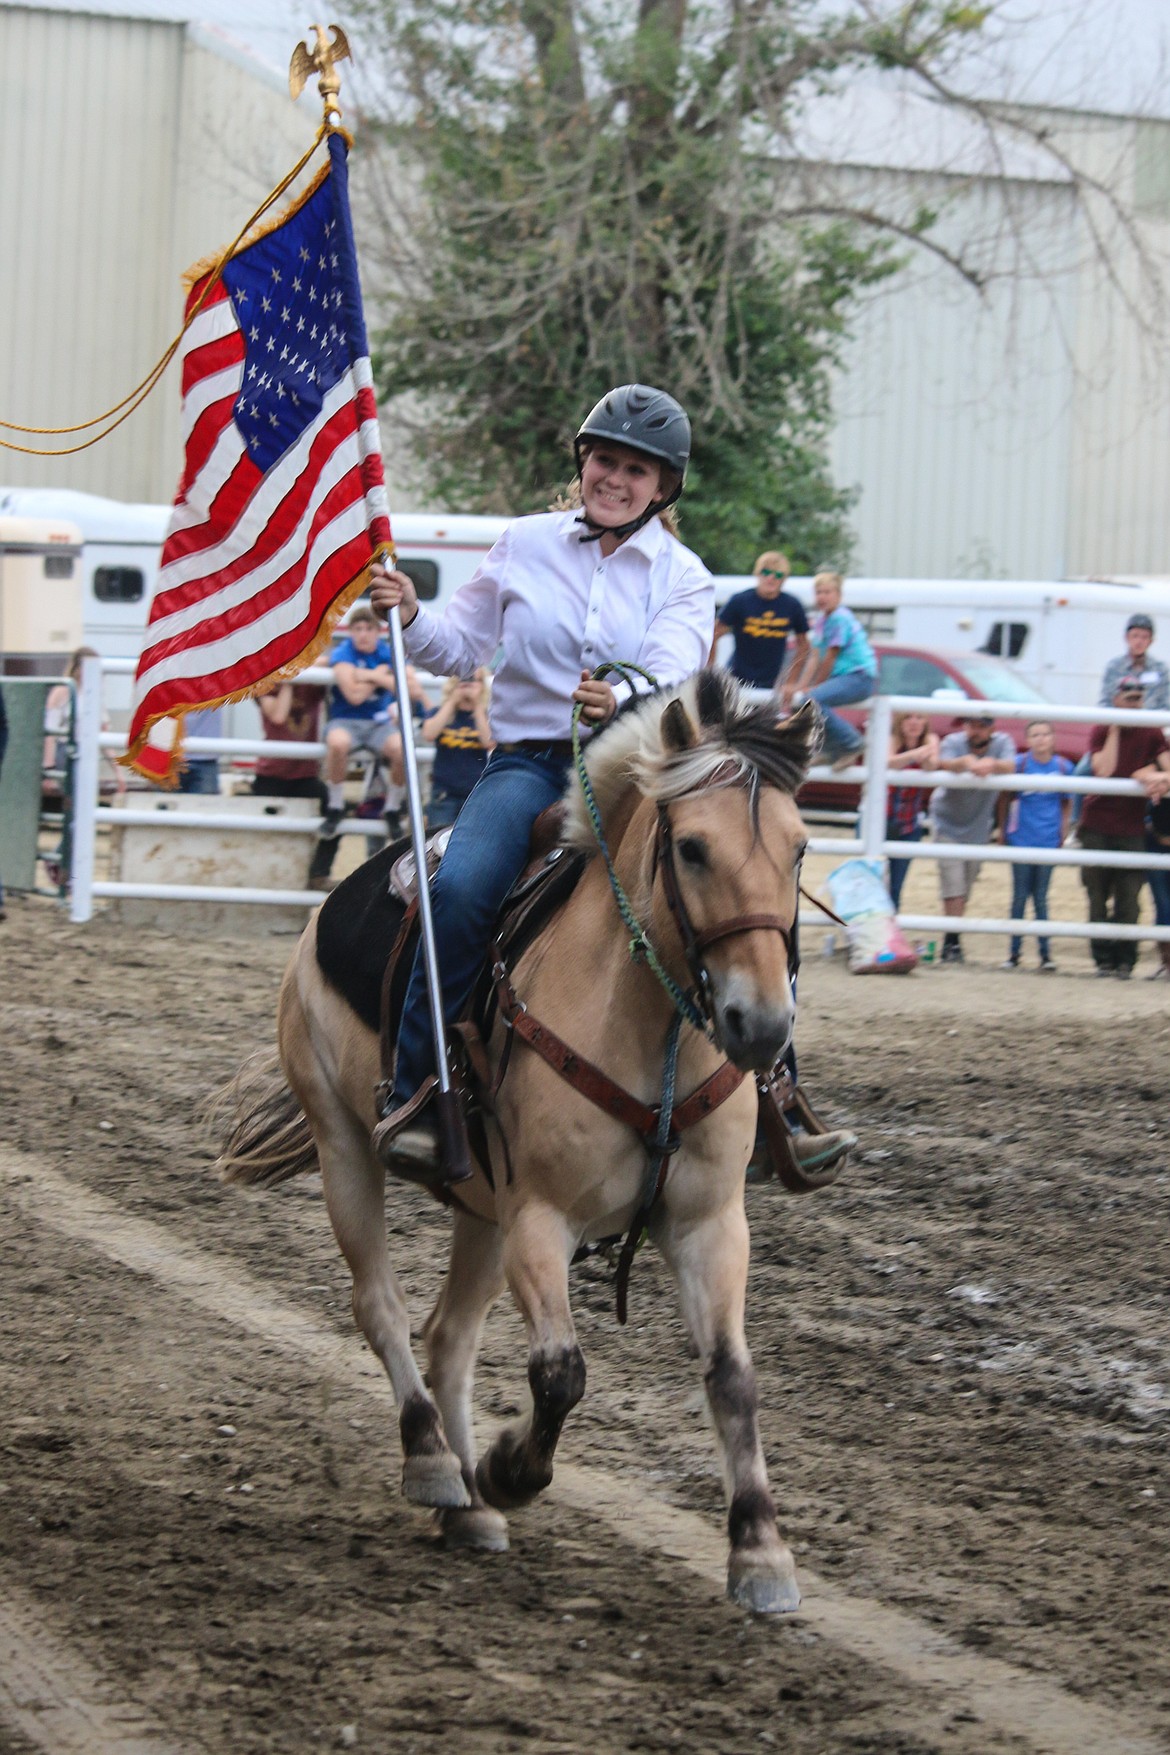 Photo by MANDI BATEMANThe American Flag was carried proudly around the arena during the opening of Family Fun Night.